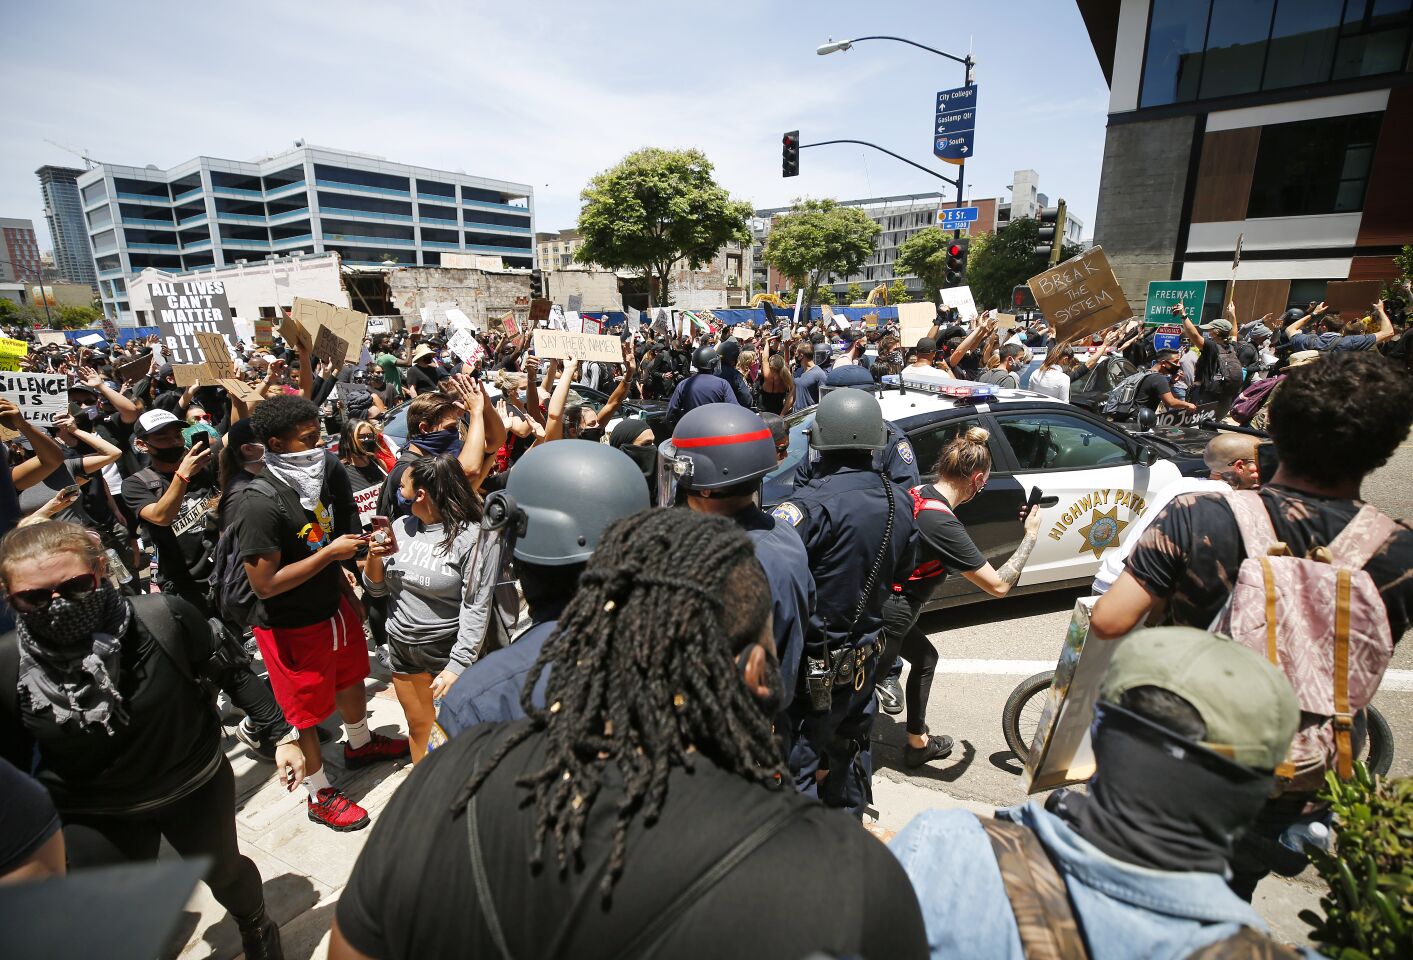 San Diego police and CHP tried to stop a group protesting the death of George Floyd from getting on I-5 in downtown San Diego on May 31, 2020. The protesters made it onto the freeway.